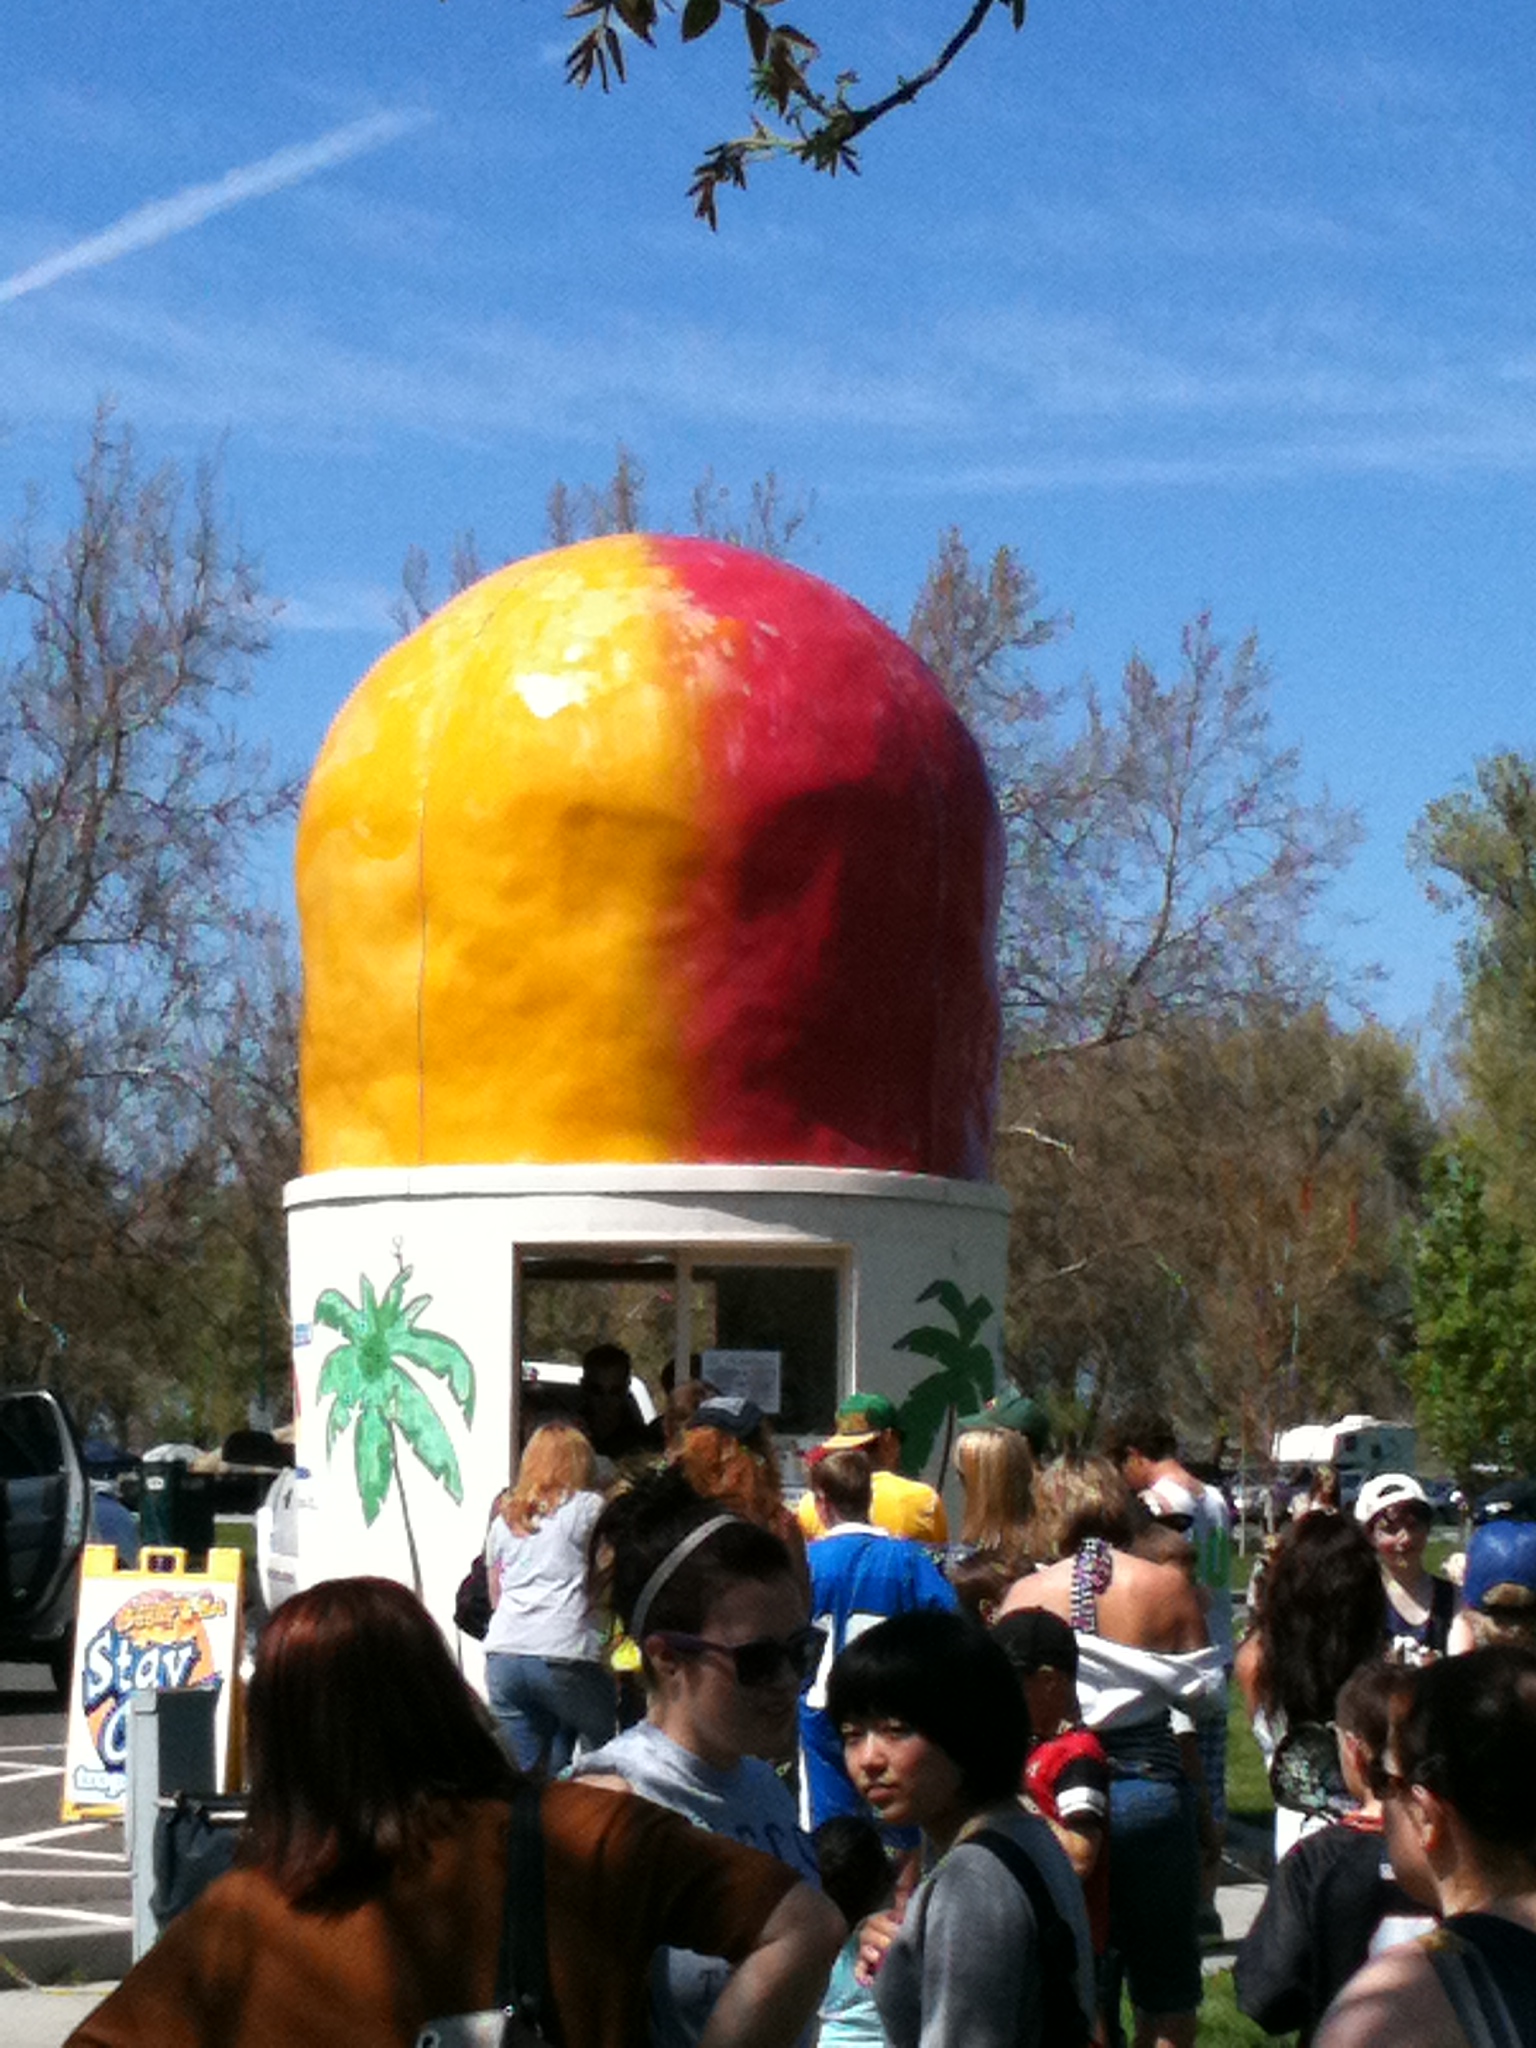 tropical sno stand